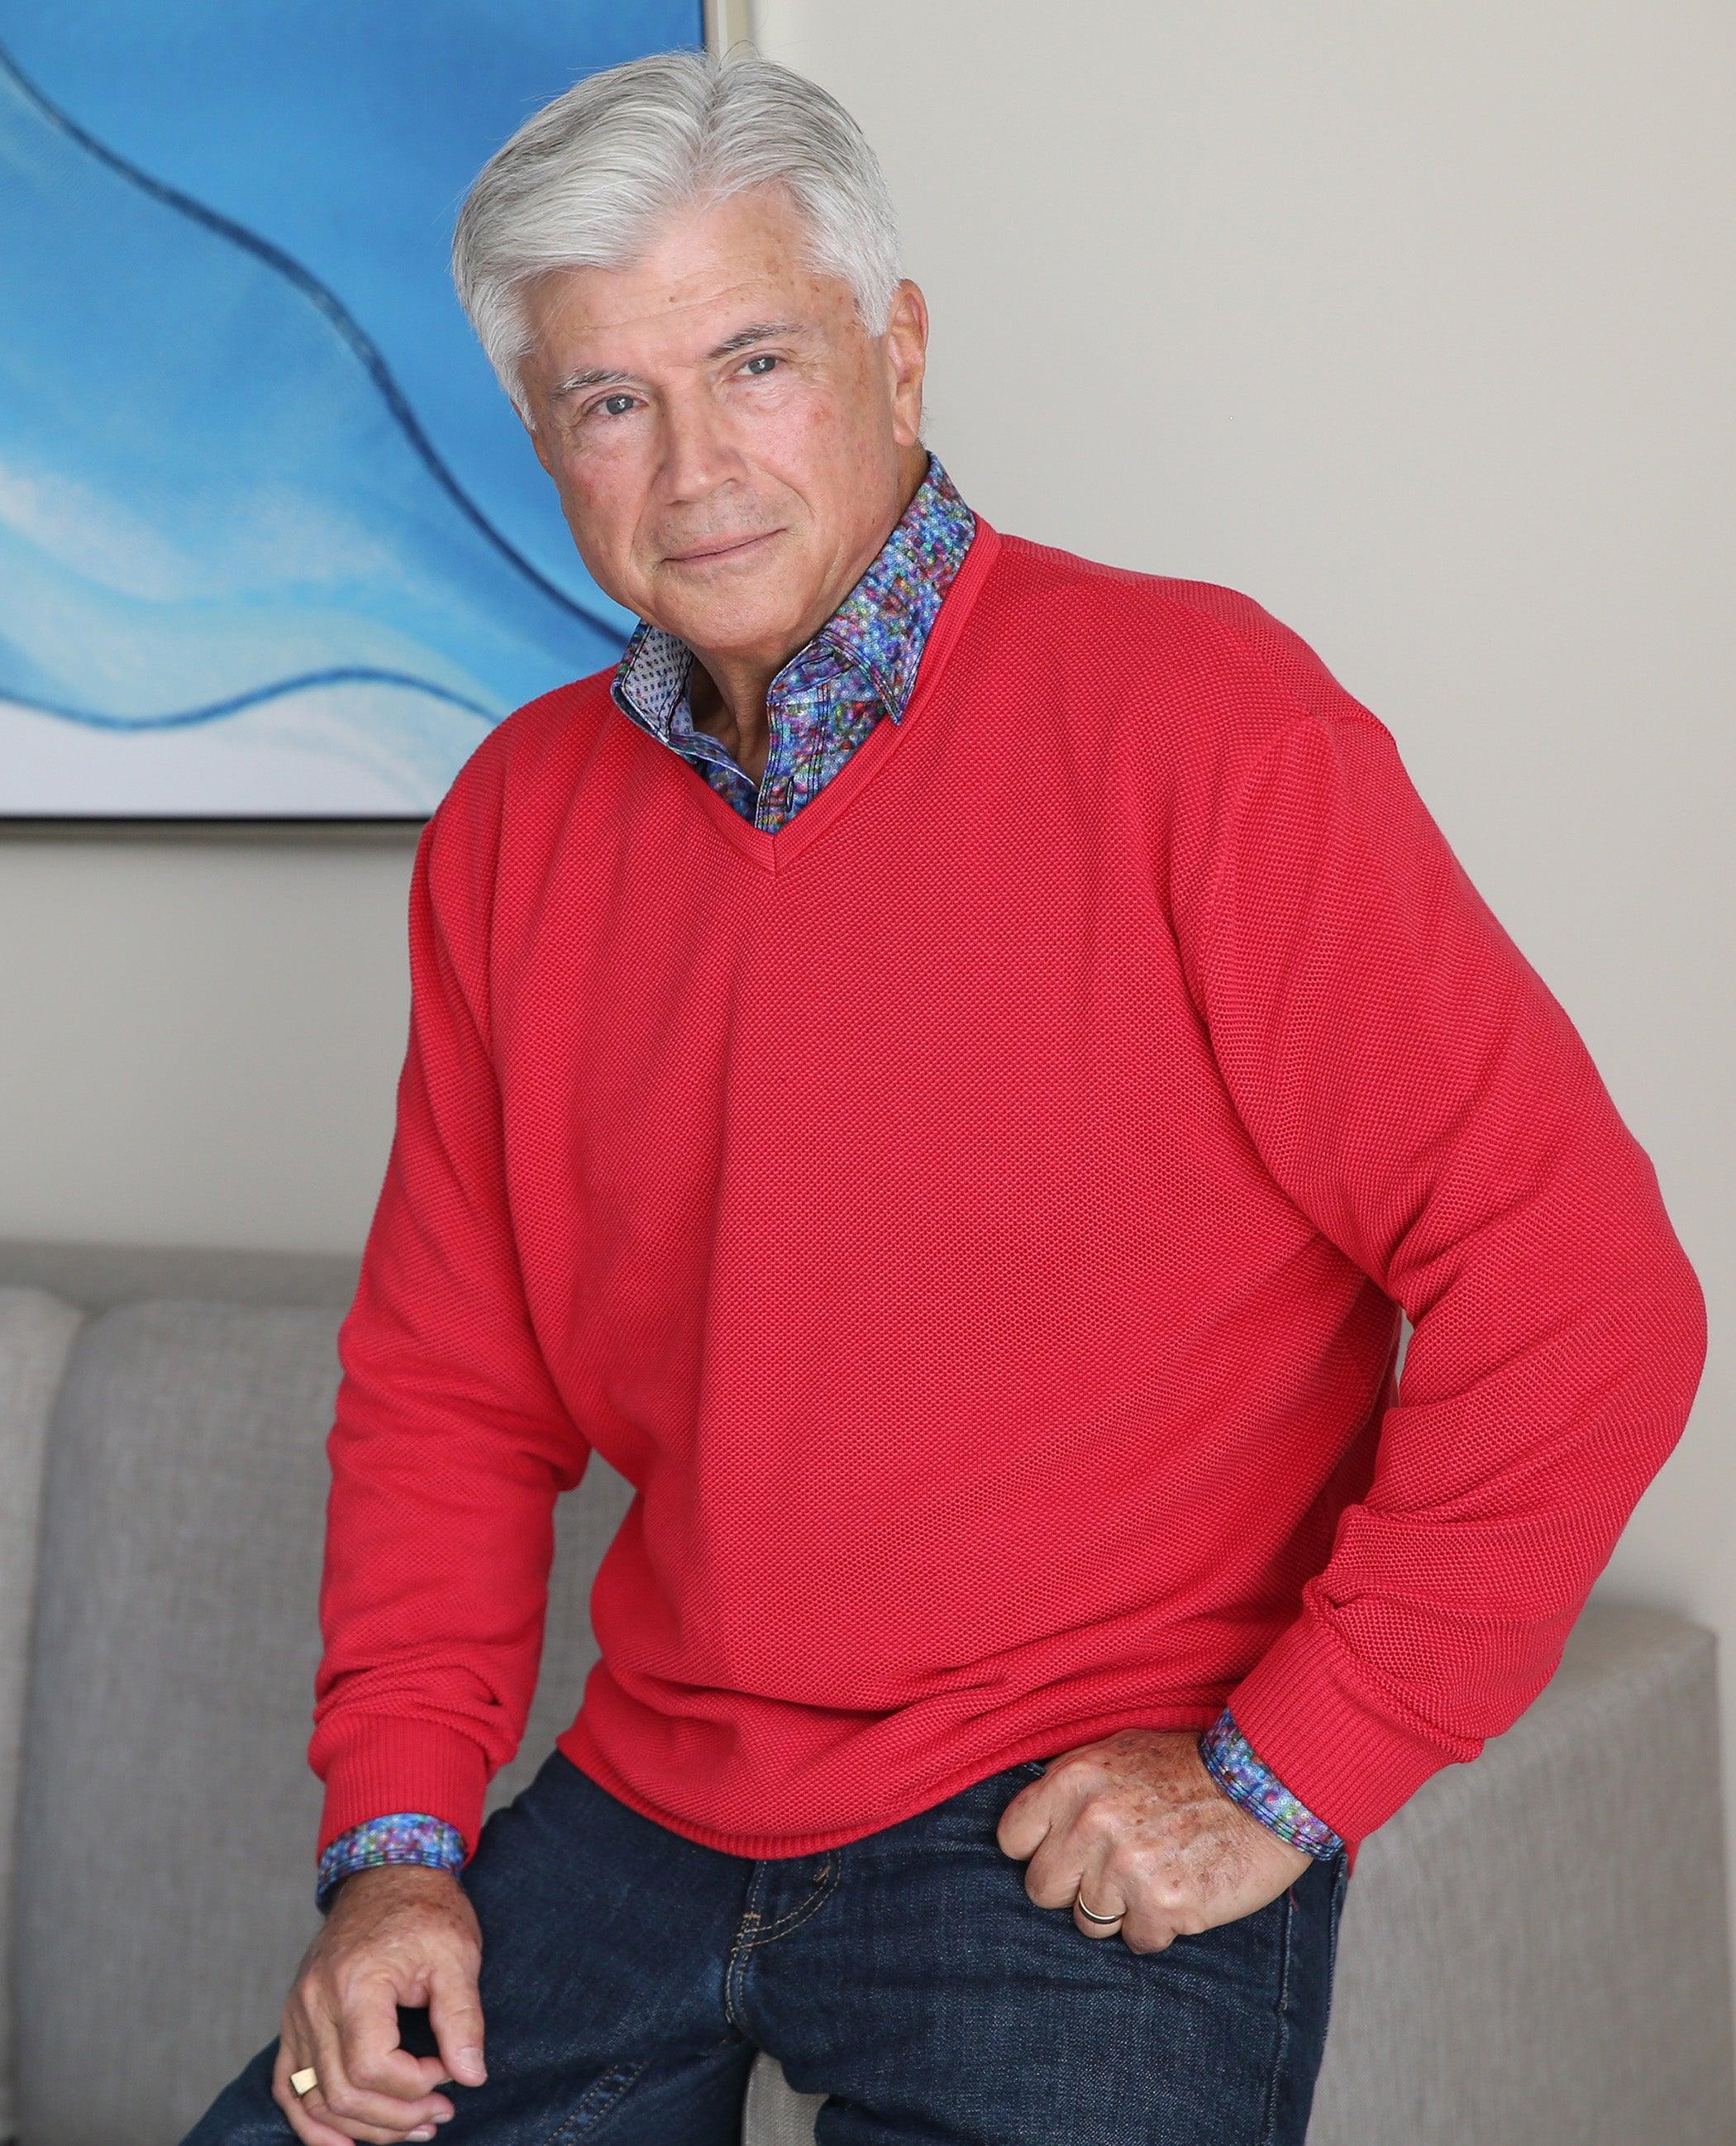 A staple for any wardrobe, the high low, two color yarn, in a popcorn stitch is perfect over a sport shirt or worn alone. Classic style that is timeless. The finest knitting of 100% cotton yarns. Classic fit.    Marcello Classic V Neck